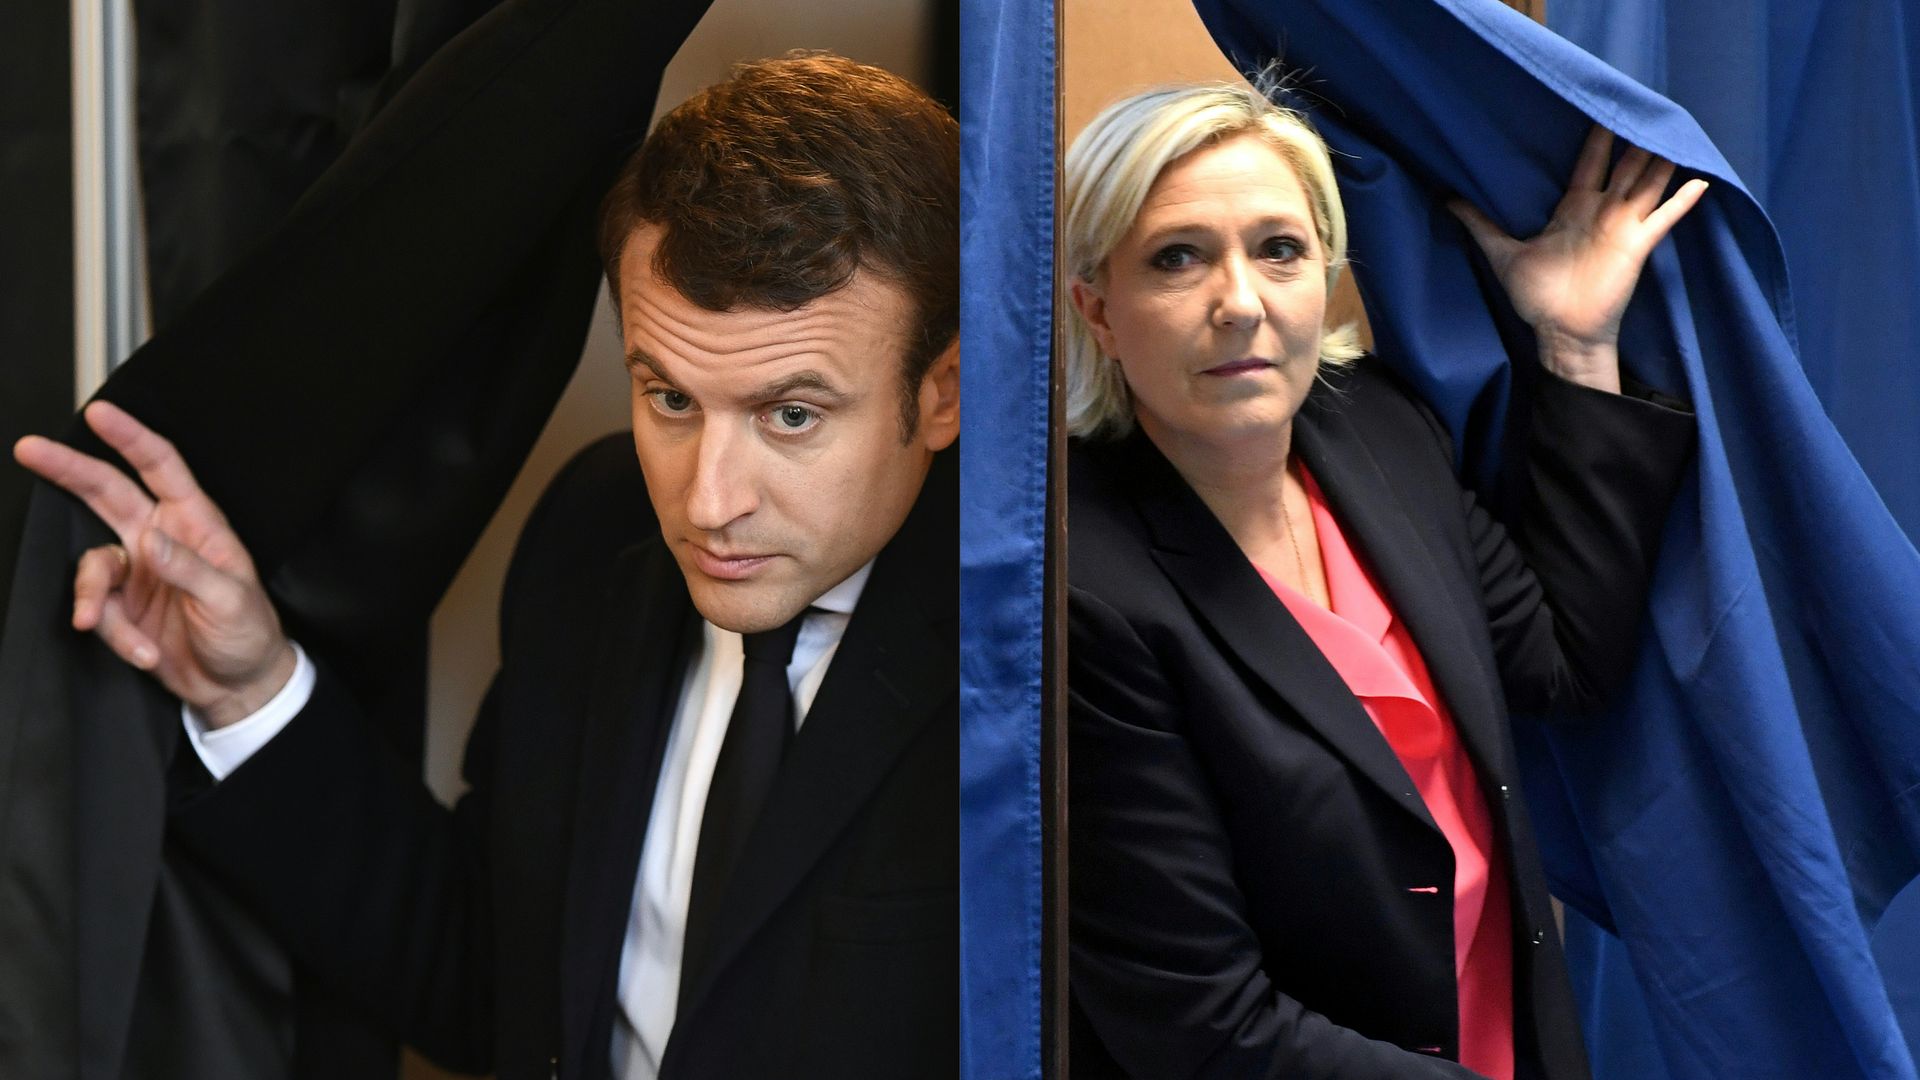 This combination of pictures created on May 7, 2017 shows French presidential election candidate Emmanuel Macron and Marine Le Pen 